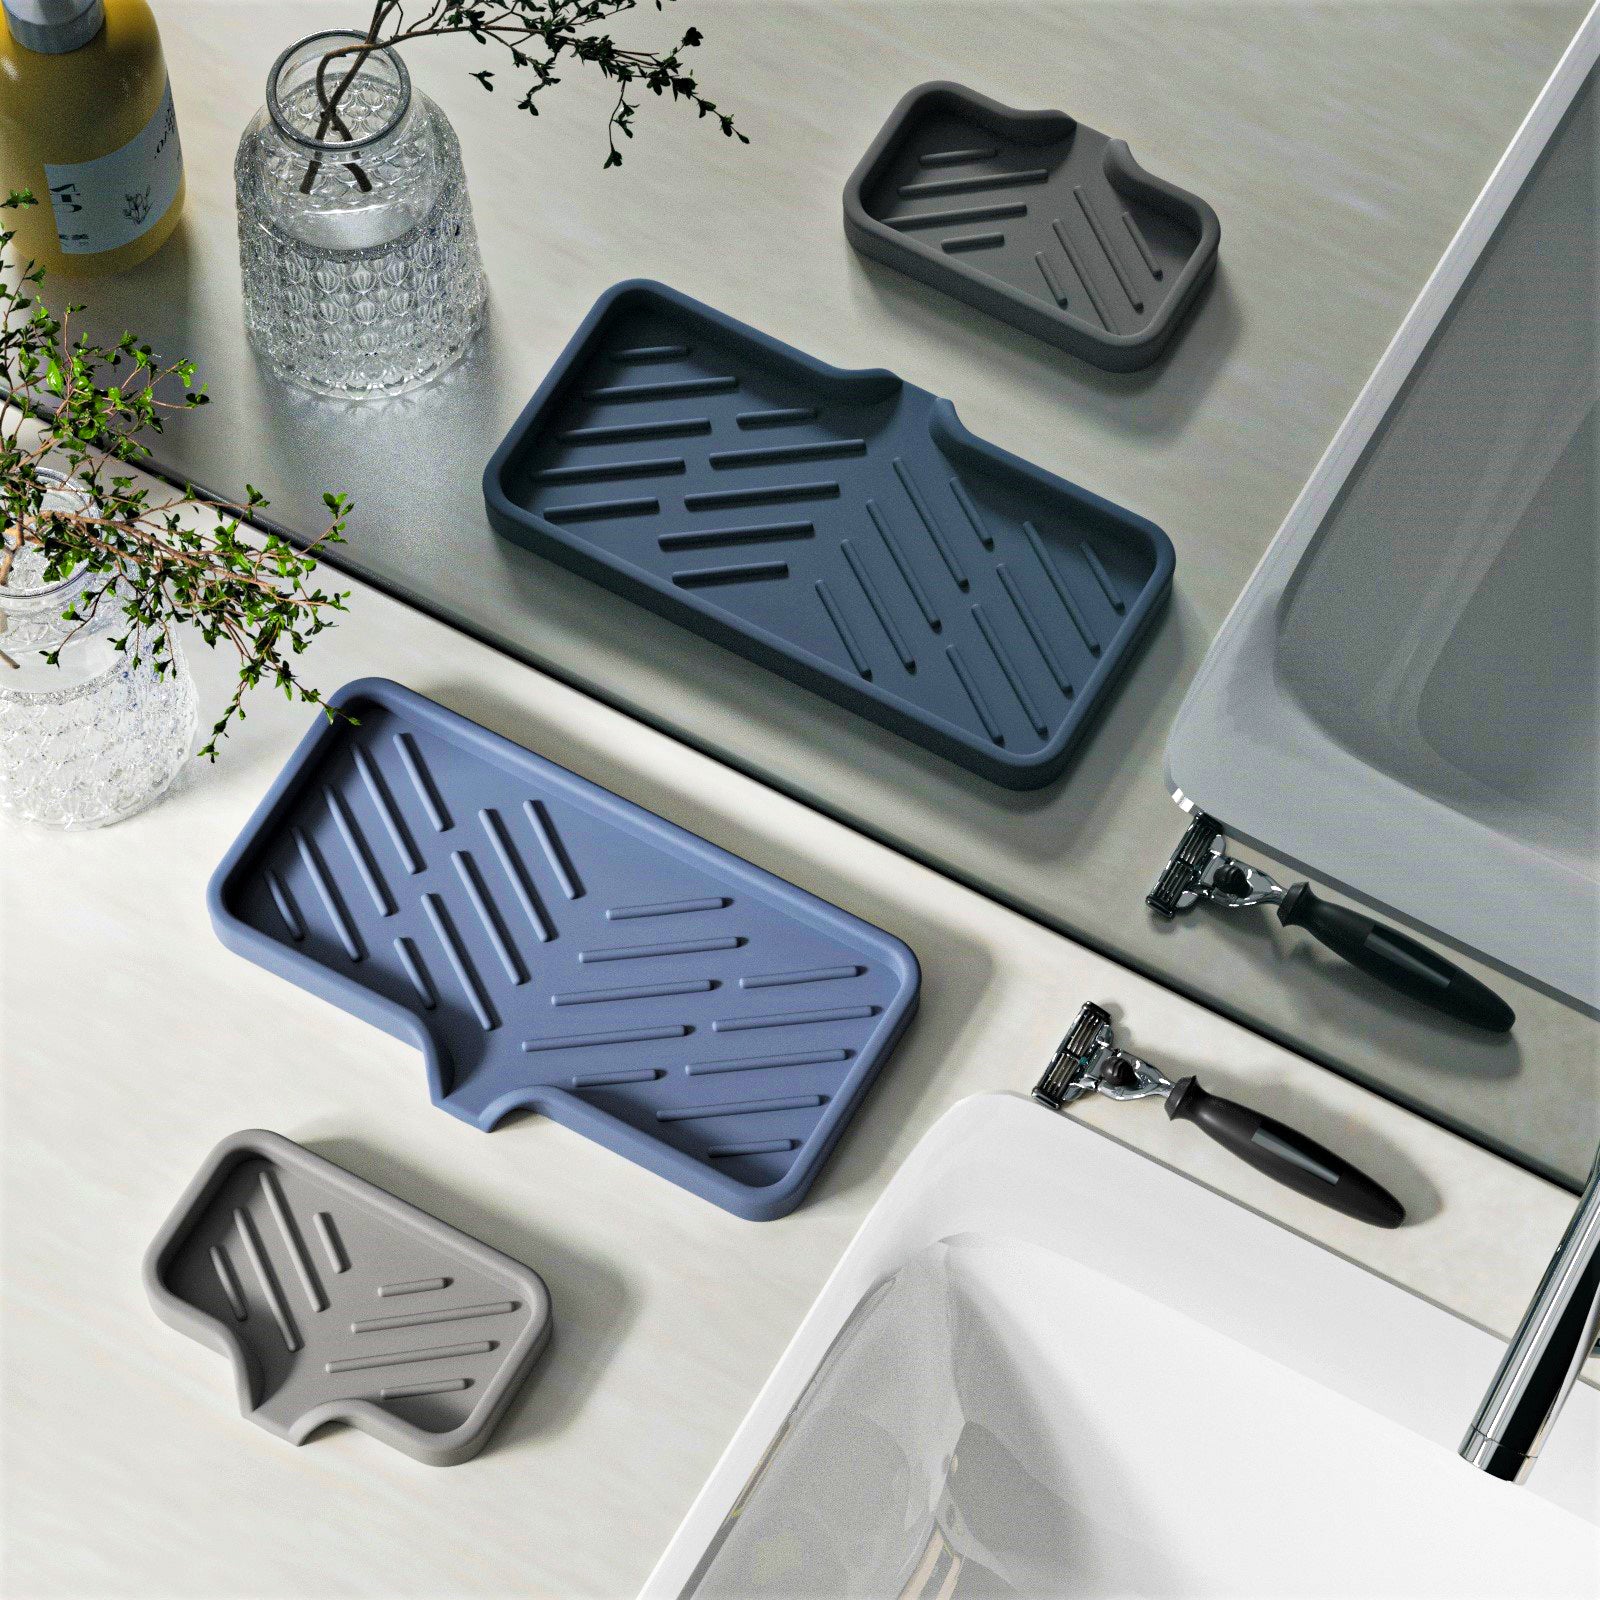 Silicone Drainer Tray